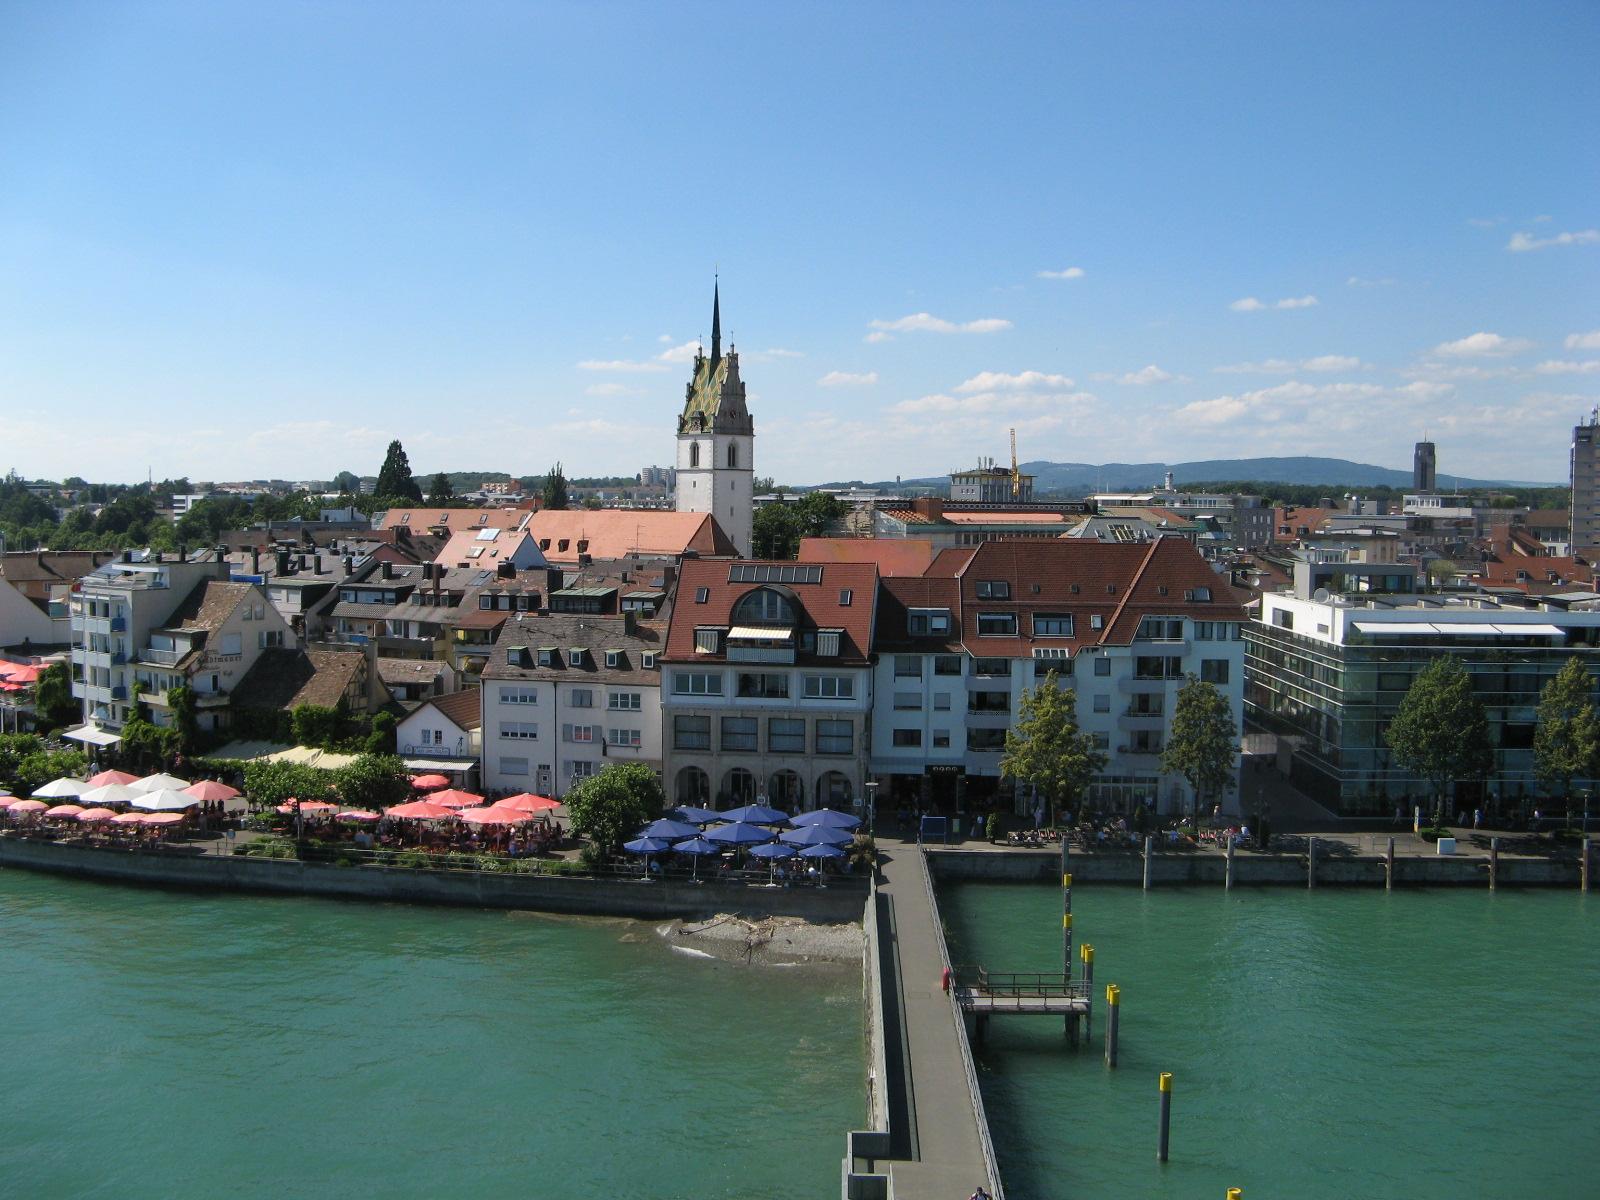 Bodensee in Germany